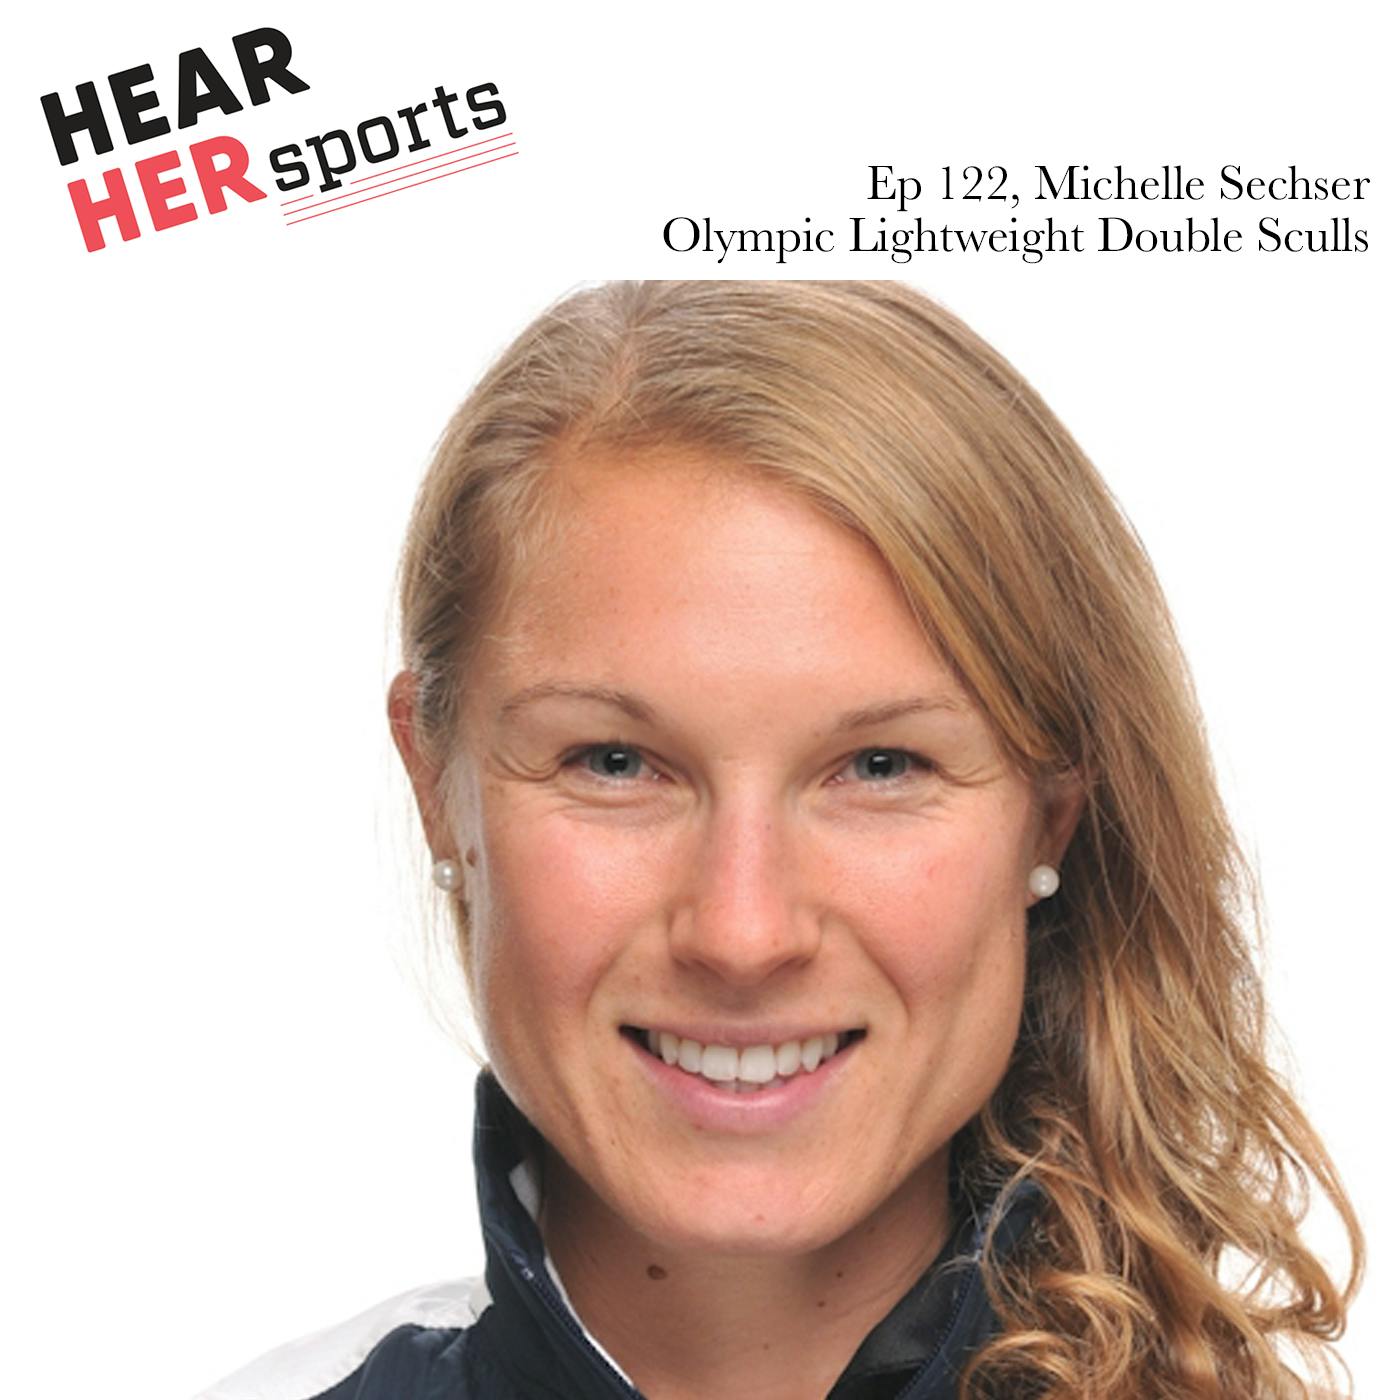 Michelle Sechser Olympic Lightweight Double Sculls…Ep122